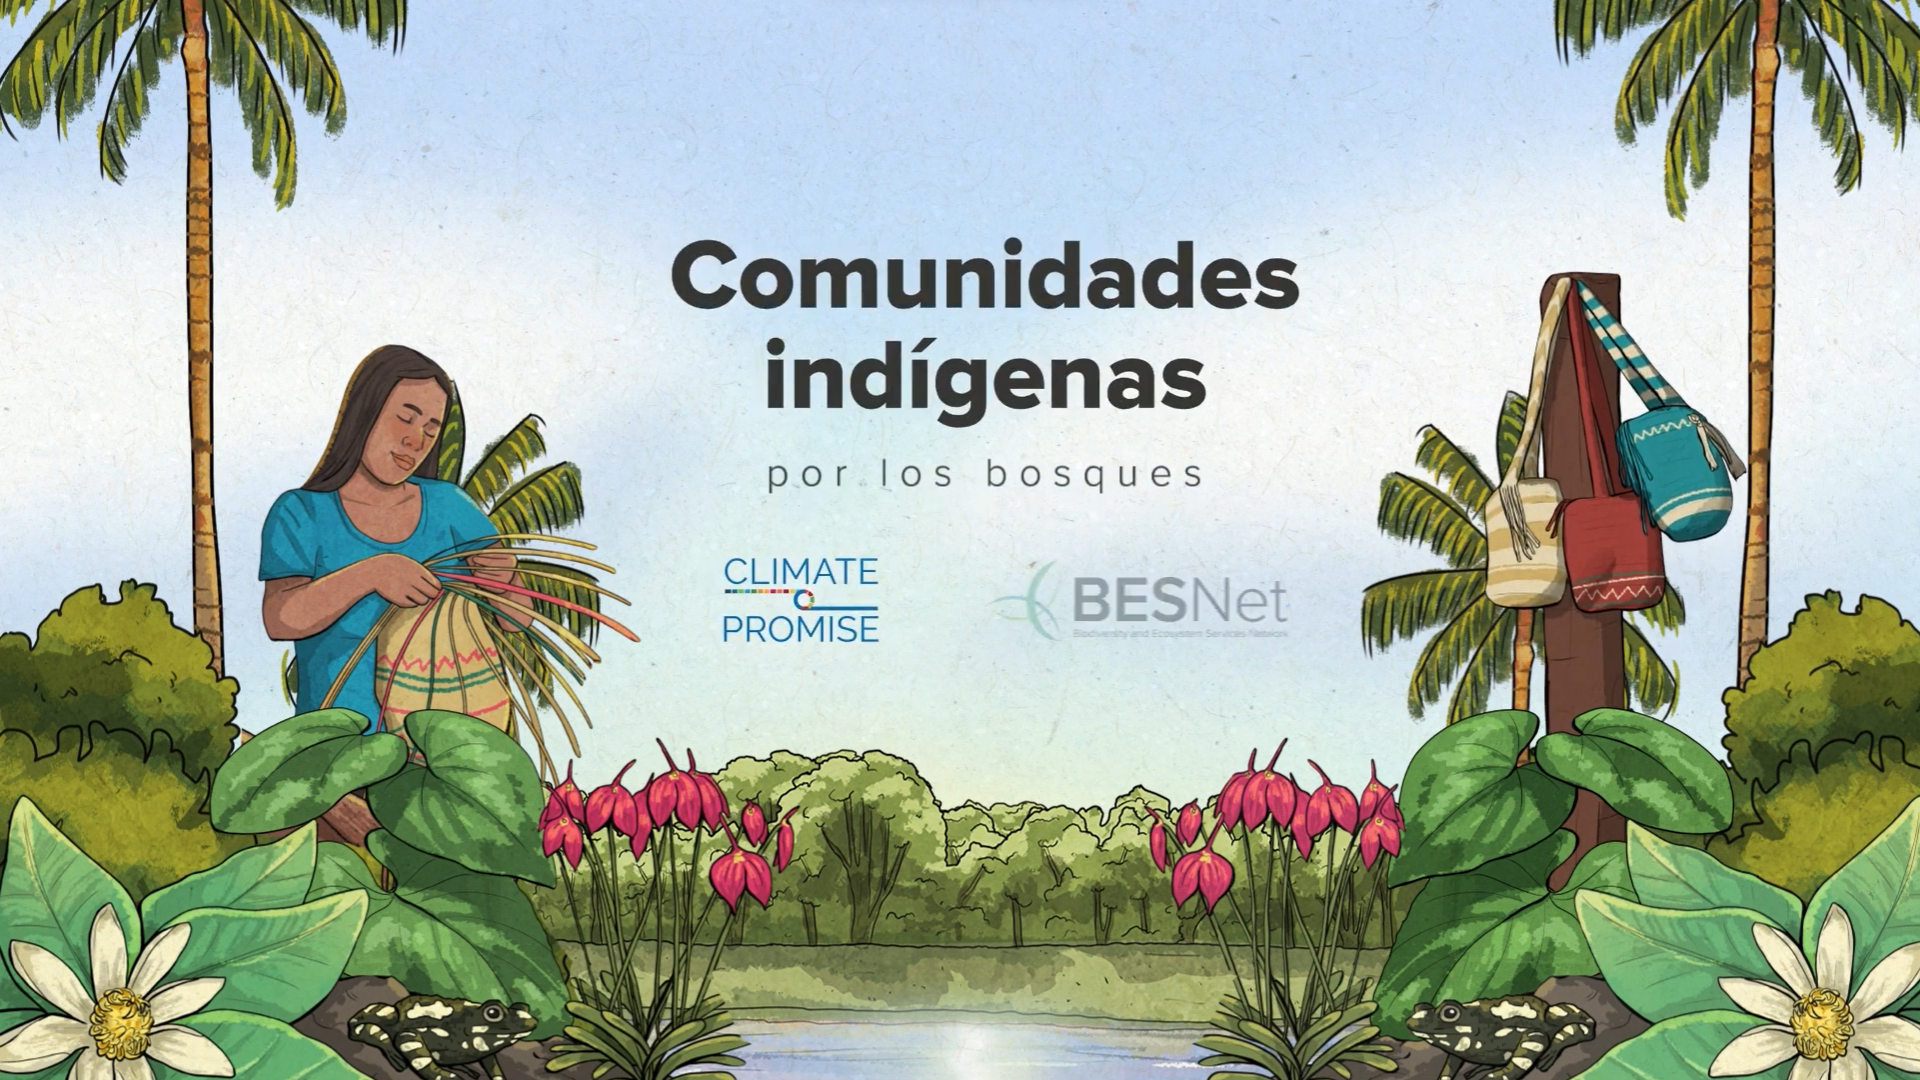 Colombia video on Indigenous Communities through the Forests